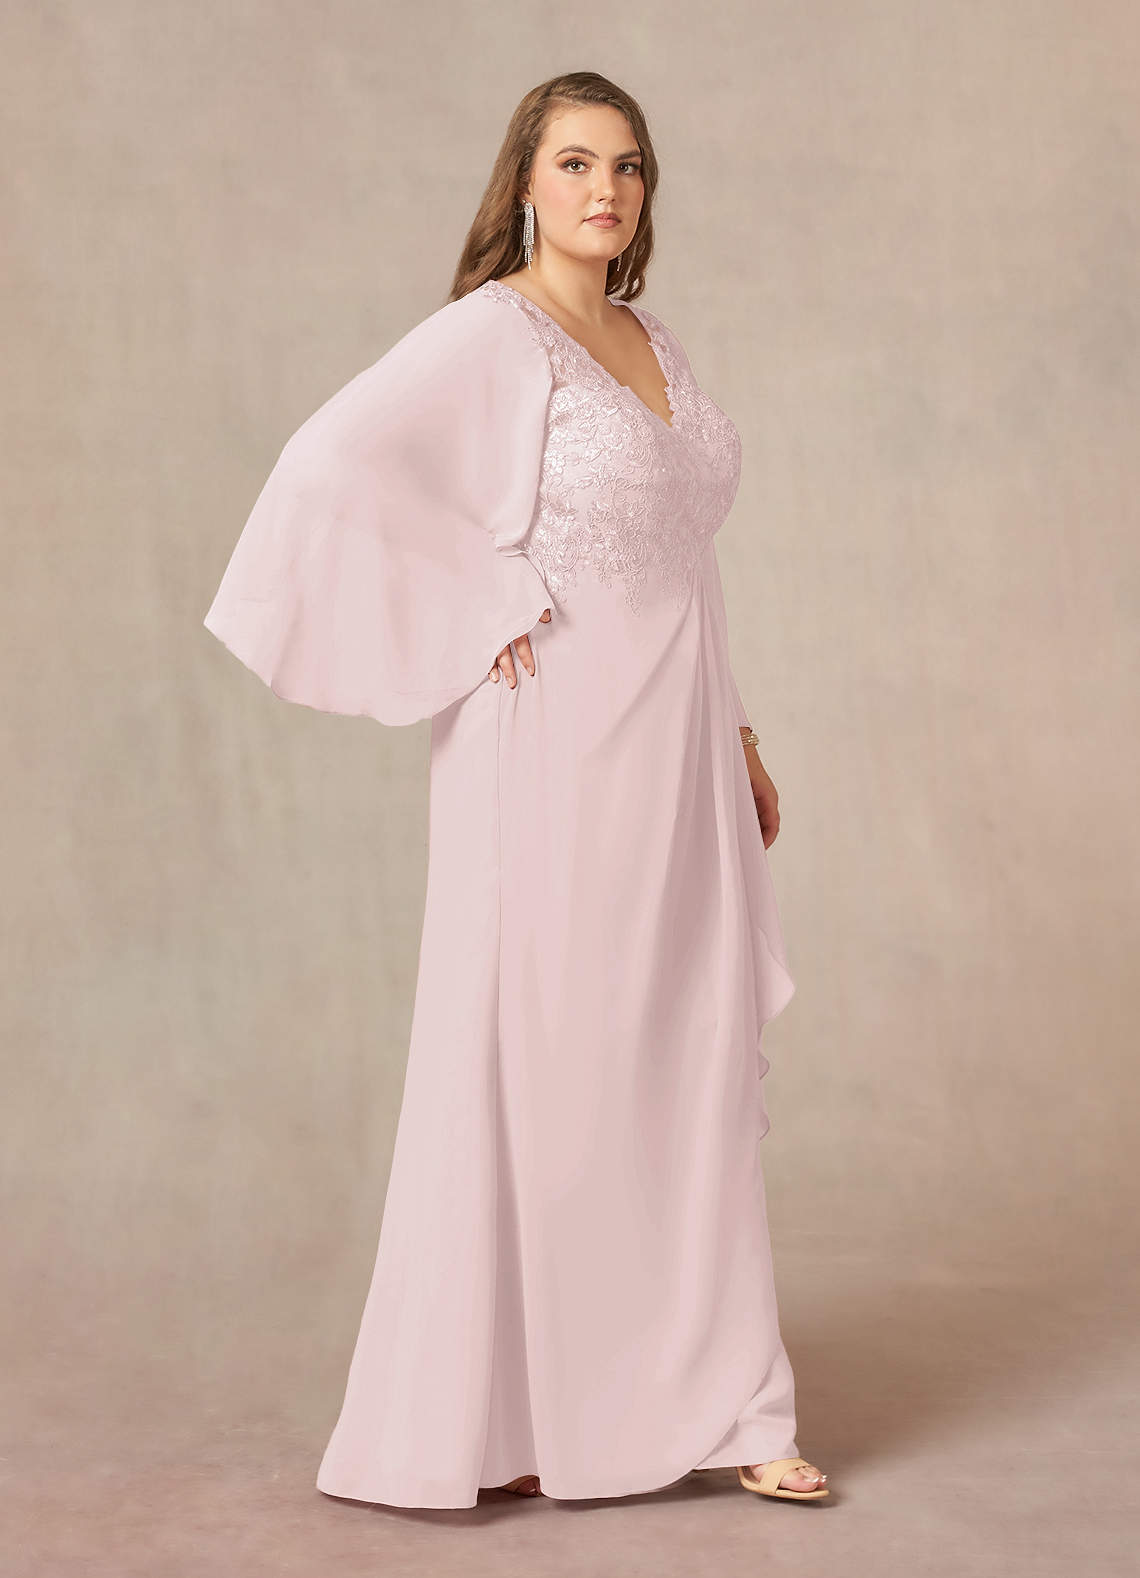 Azazie Perry Mother of the Bride Dresses Mermaid V-Neck Lace Chiffon Floor-Length Dress image1